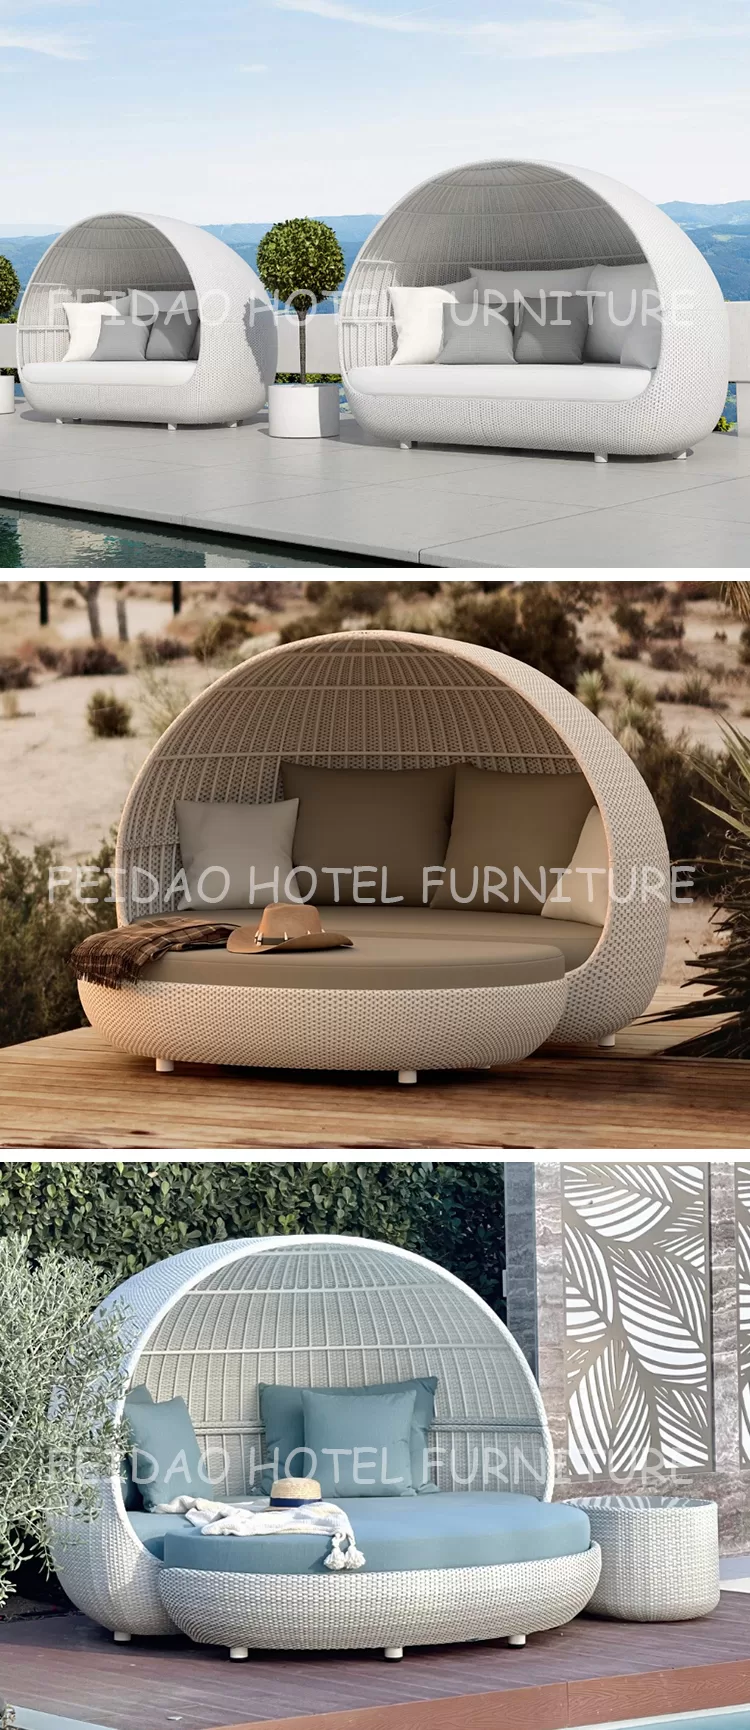 Rattan Daybed Outdoor